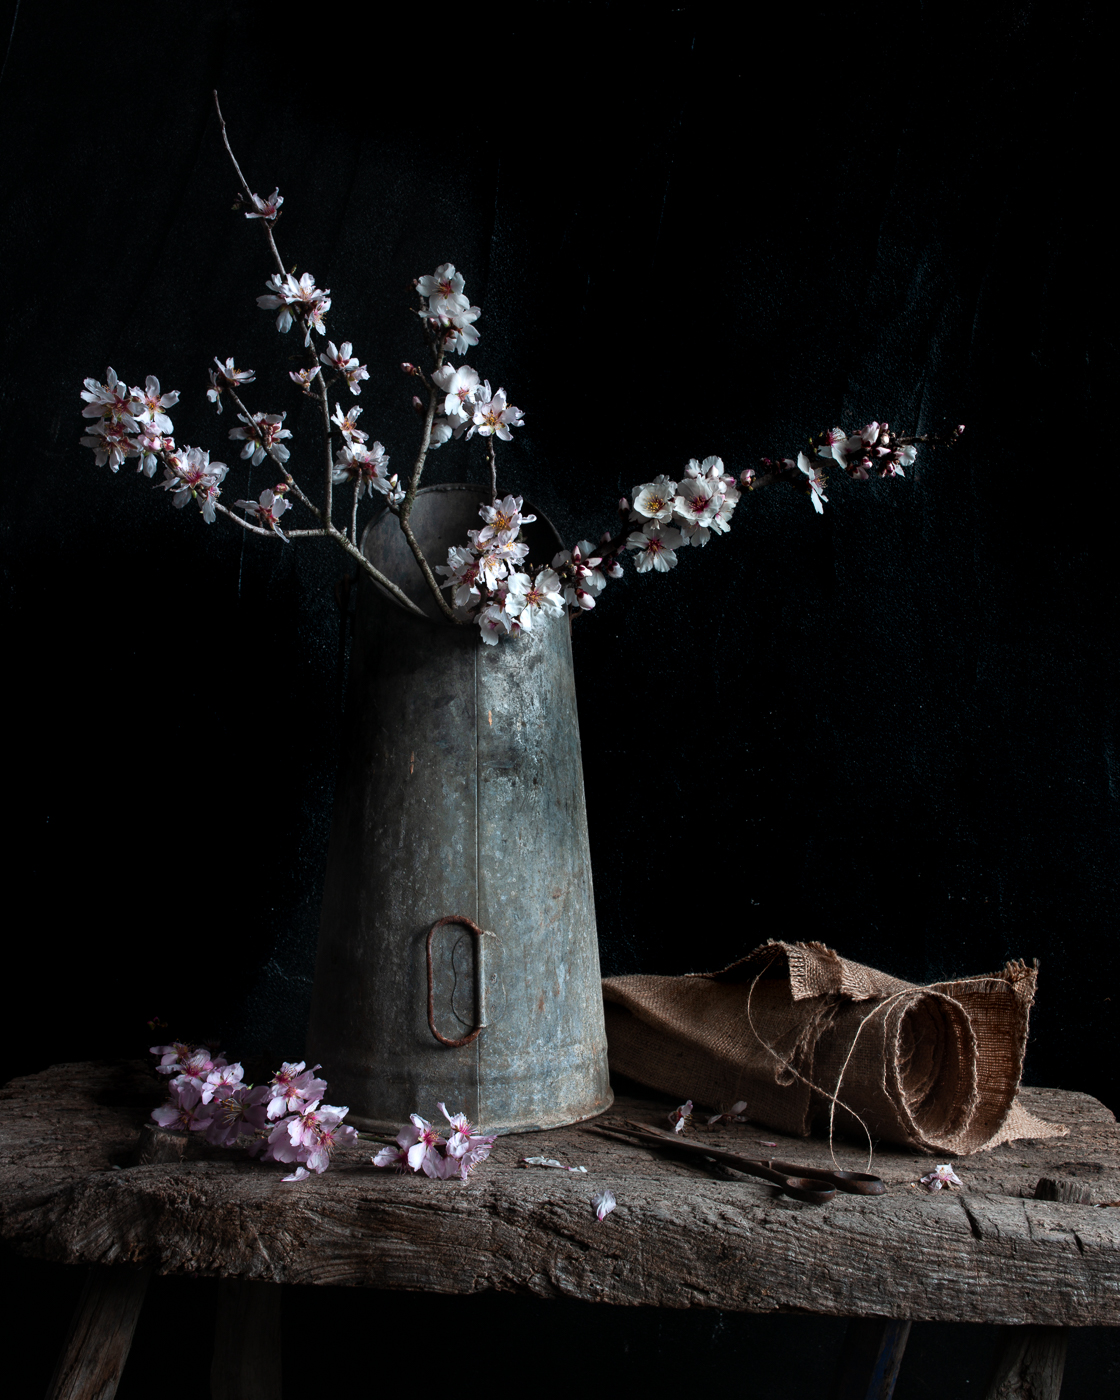 Branches with white and pink blossoms stand tall in an old metal container